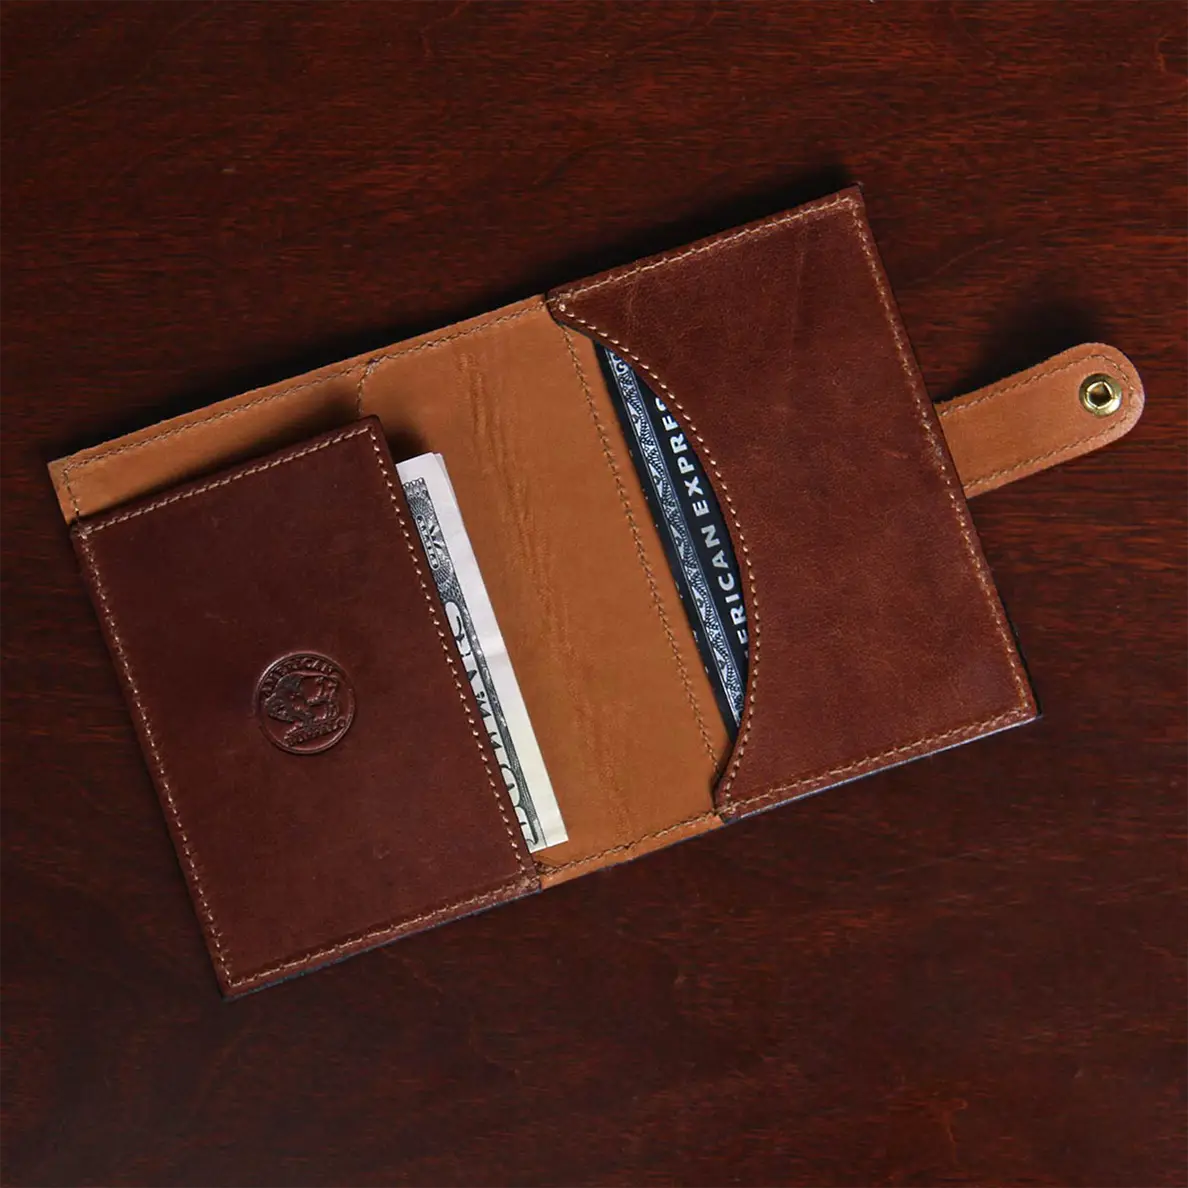 open view with money and credit cards of dark brown leather wallet with snap closure